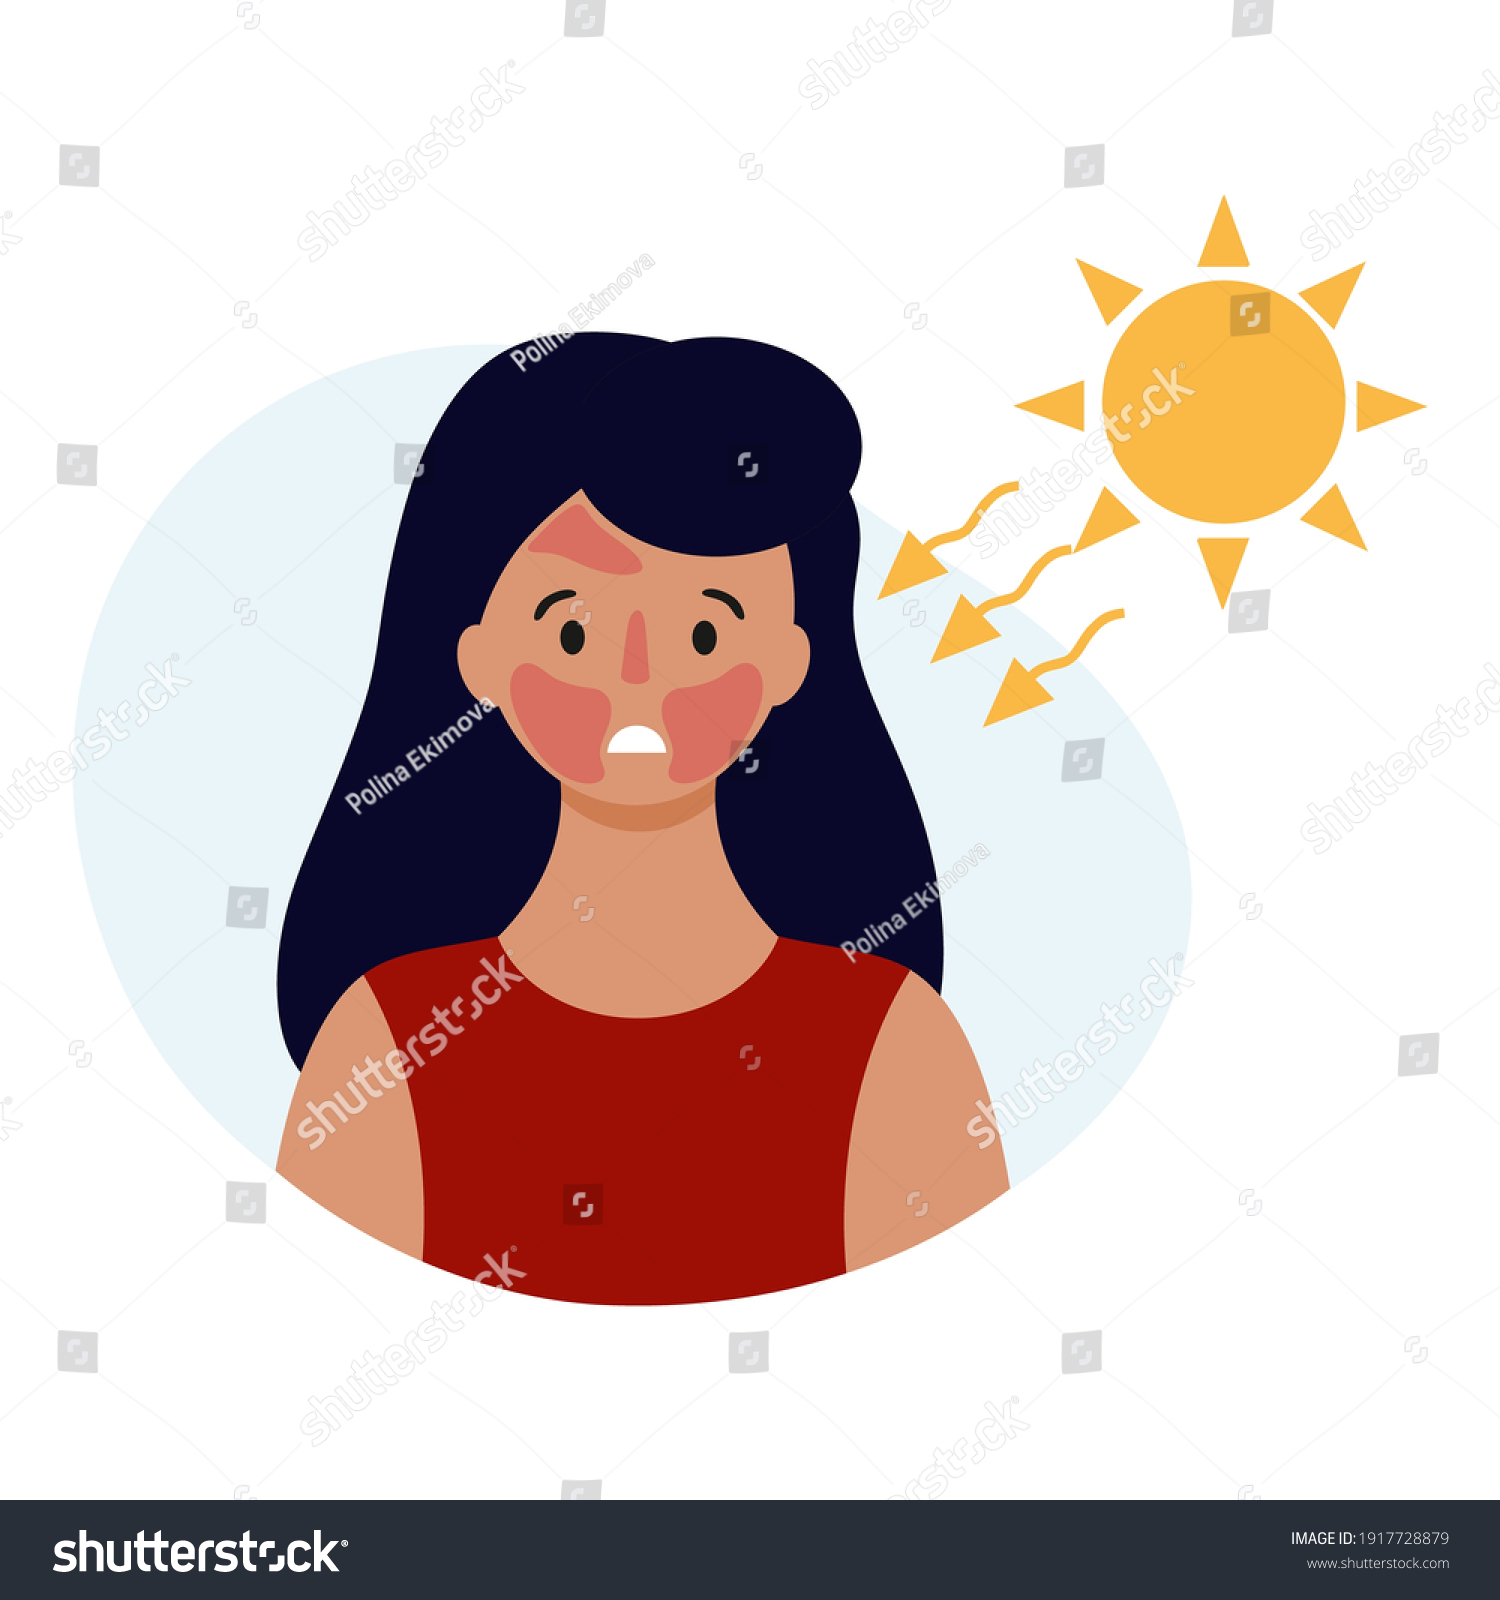 A sad girl with a sunburn on her face. Beauty and health of the skin. Vector illustration in a flat style. #1917728879